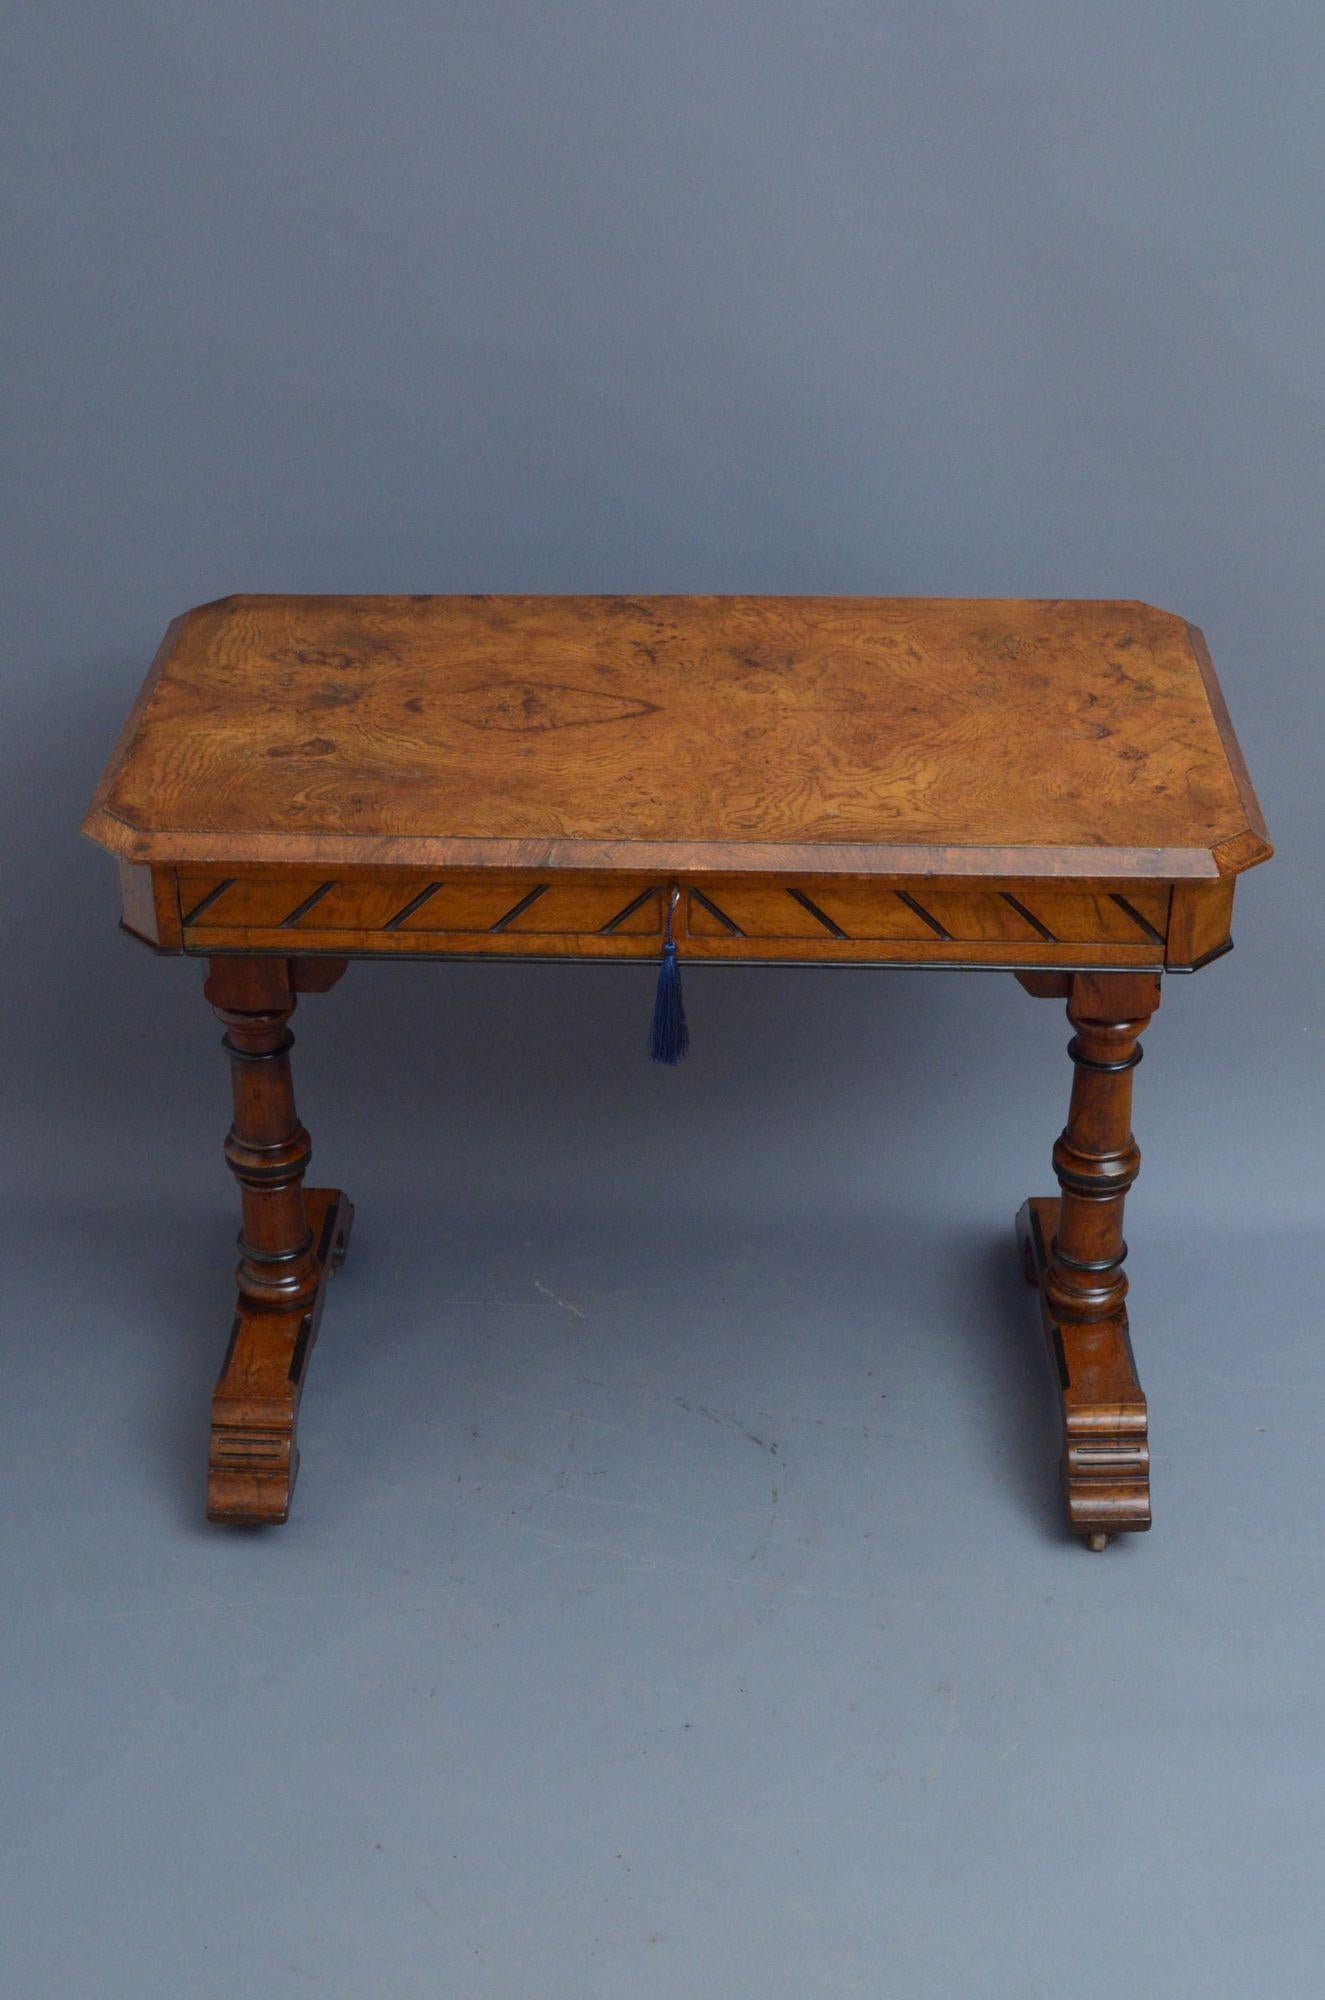 Sn5498 Stylish Victorian pollard oak table, having stunning pollard oak top with canted corners above a carved frieze drawer fitted with original working lock and a key, standing on turned and ring legs with ebonised decoration terminating in